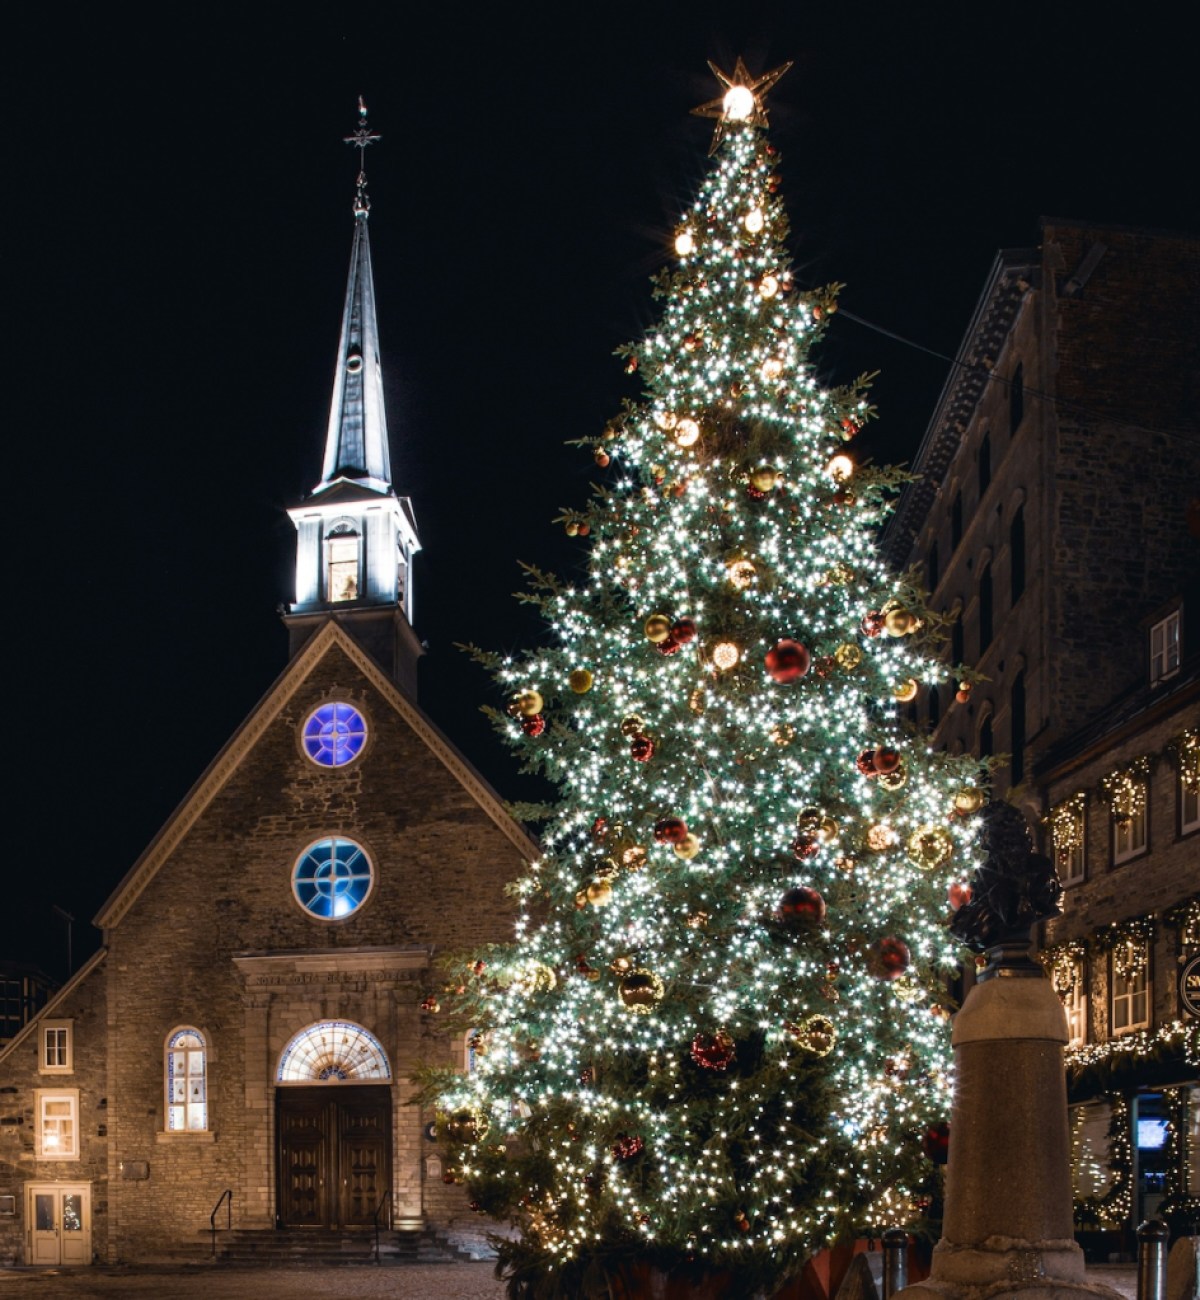 Christmas tree lit up in Old Quebec